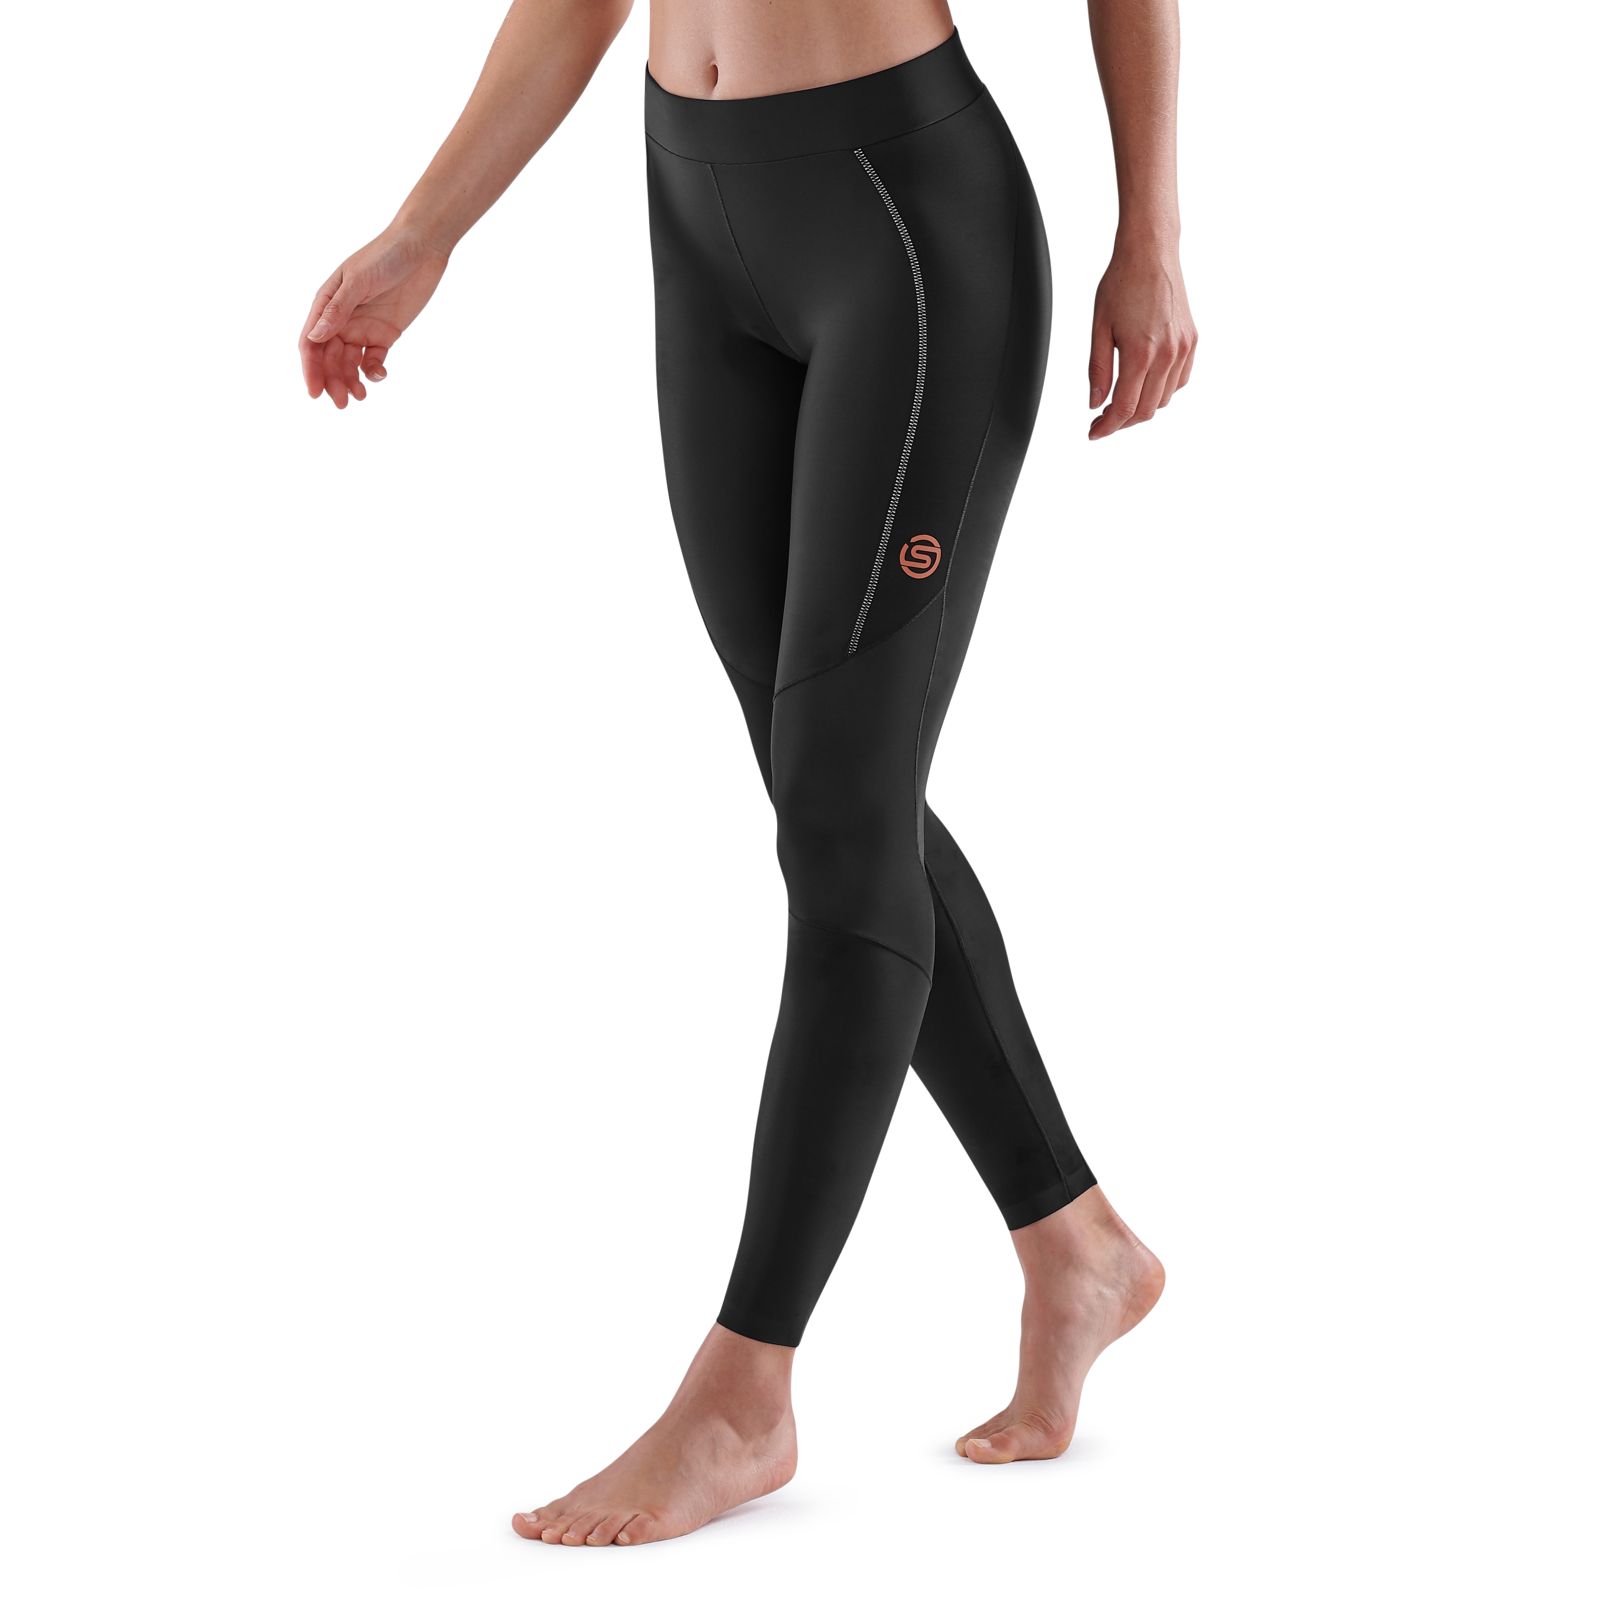 Infini Compression Race Base Layer Tights in Women average savings of 68%  at Sierra